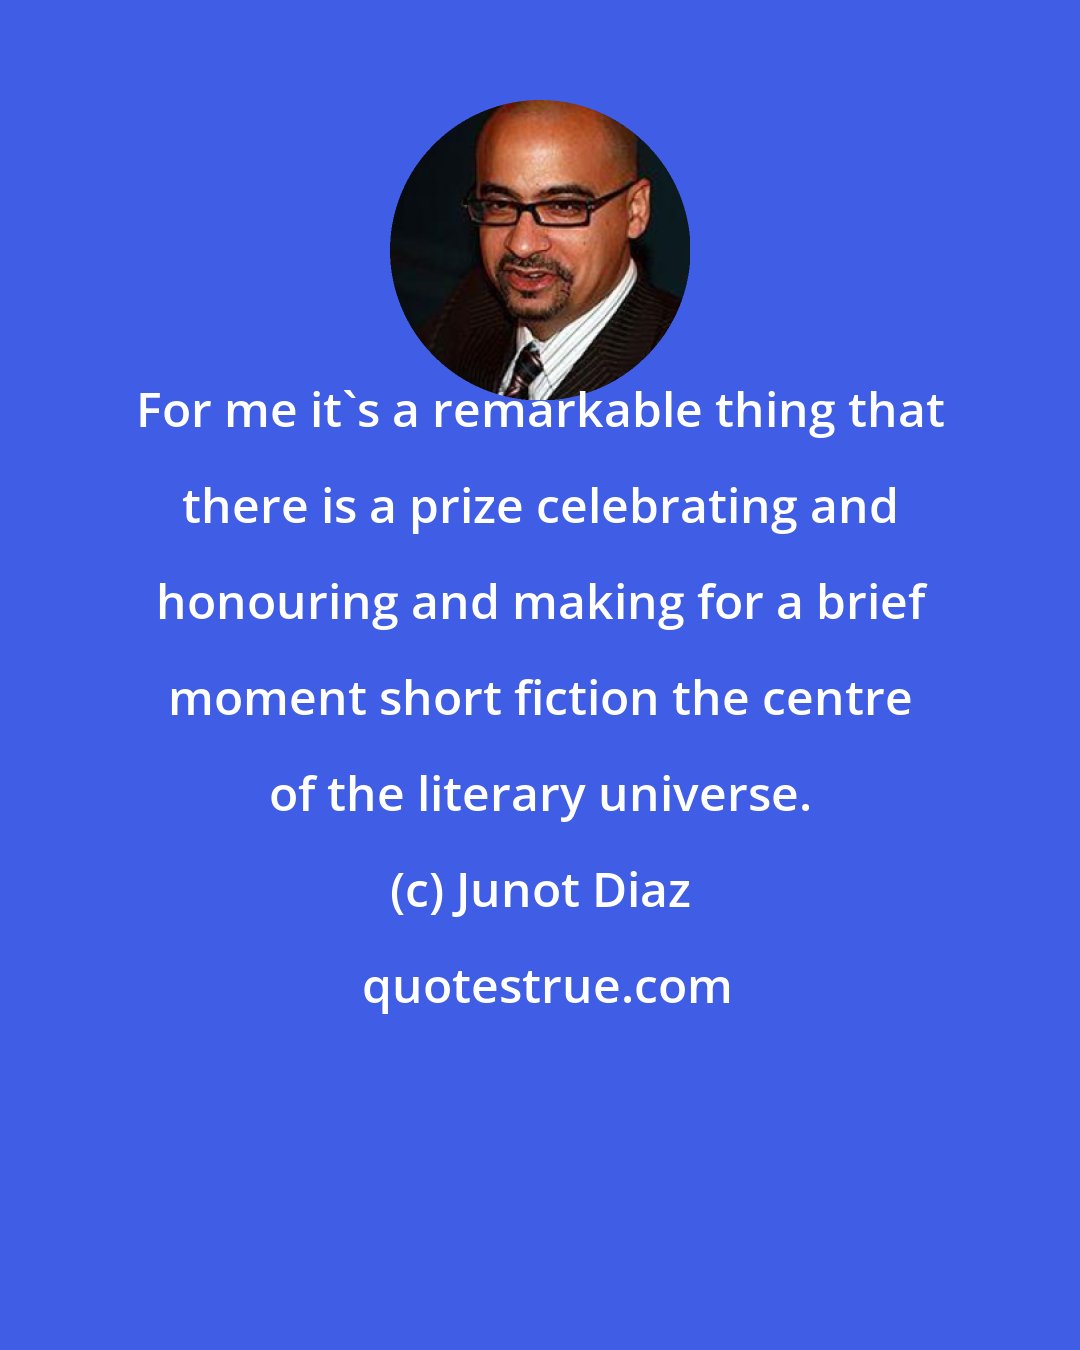 Junot Diaz: For me it's a remarkable thing that there is a prize celebrating and honouring and making for a brief moment short fiction the centre of the literary universe.